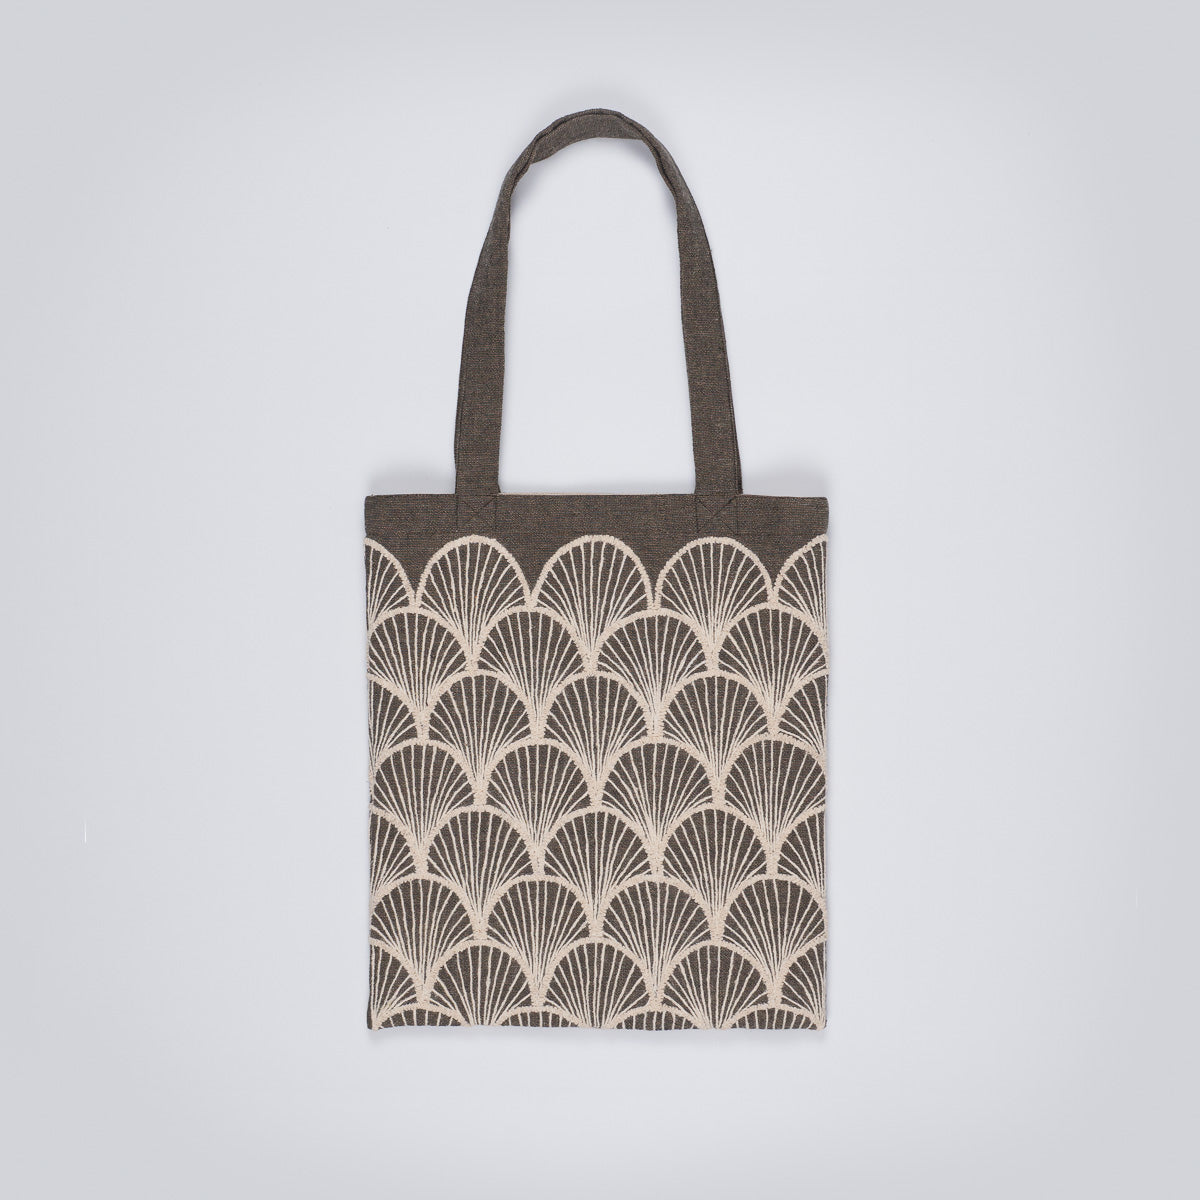 Embroidered Tote - Beige Fans | Slowstitch Studio